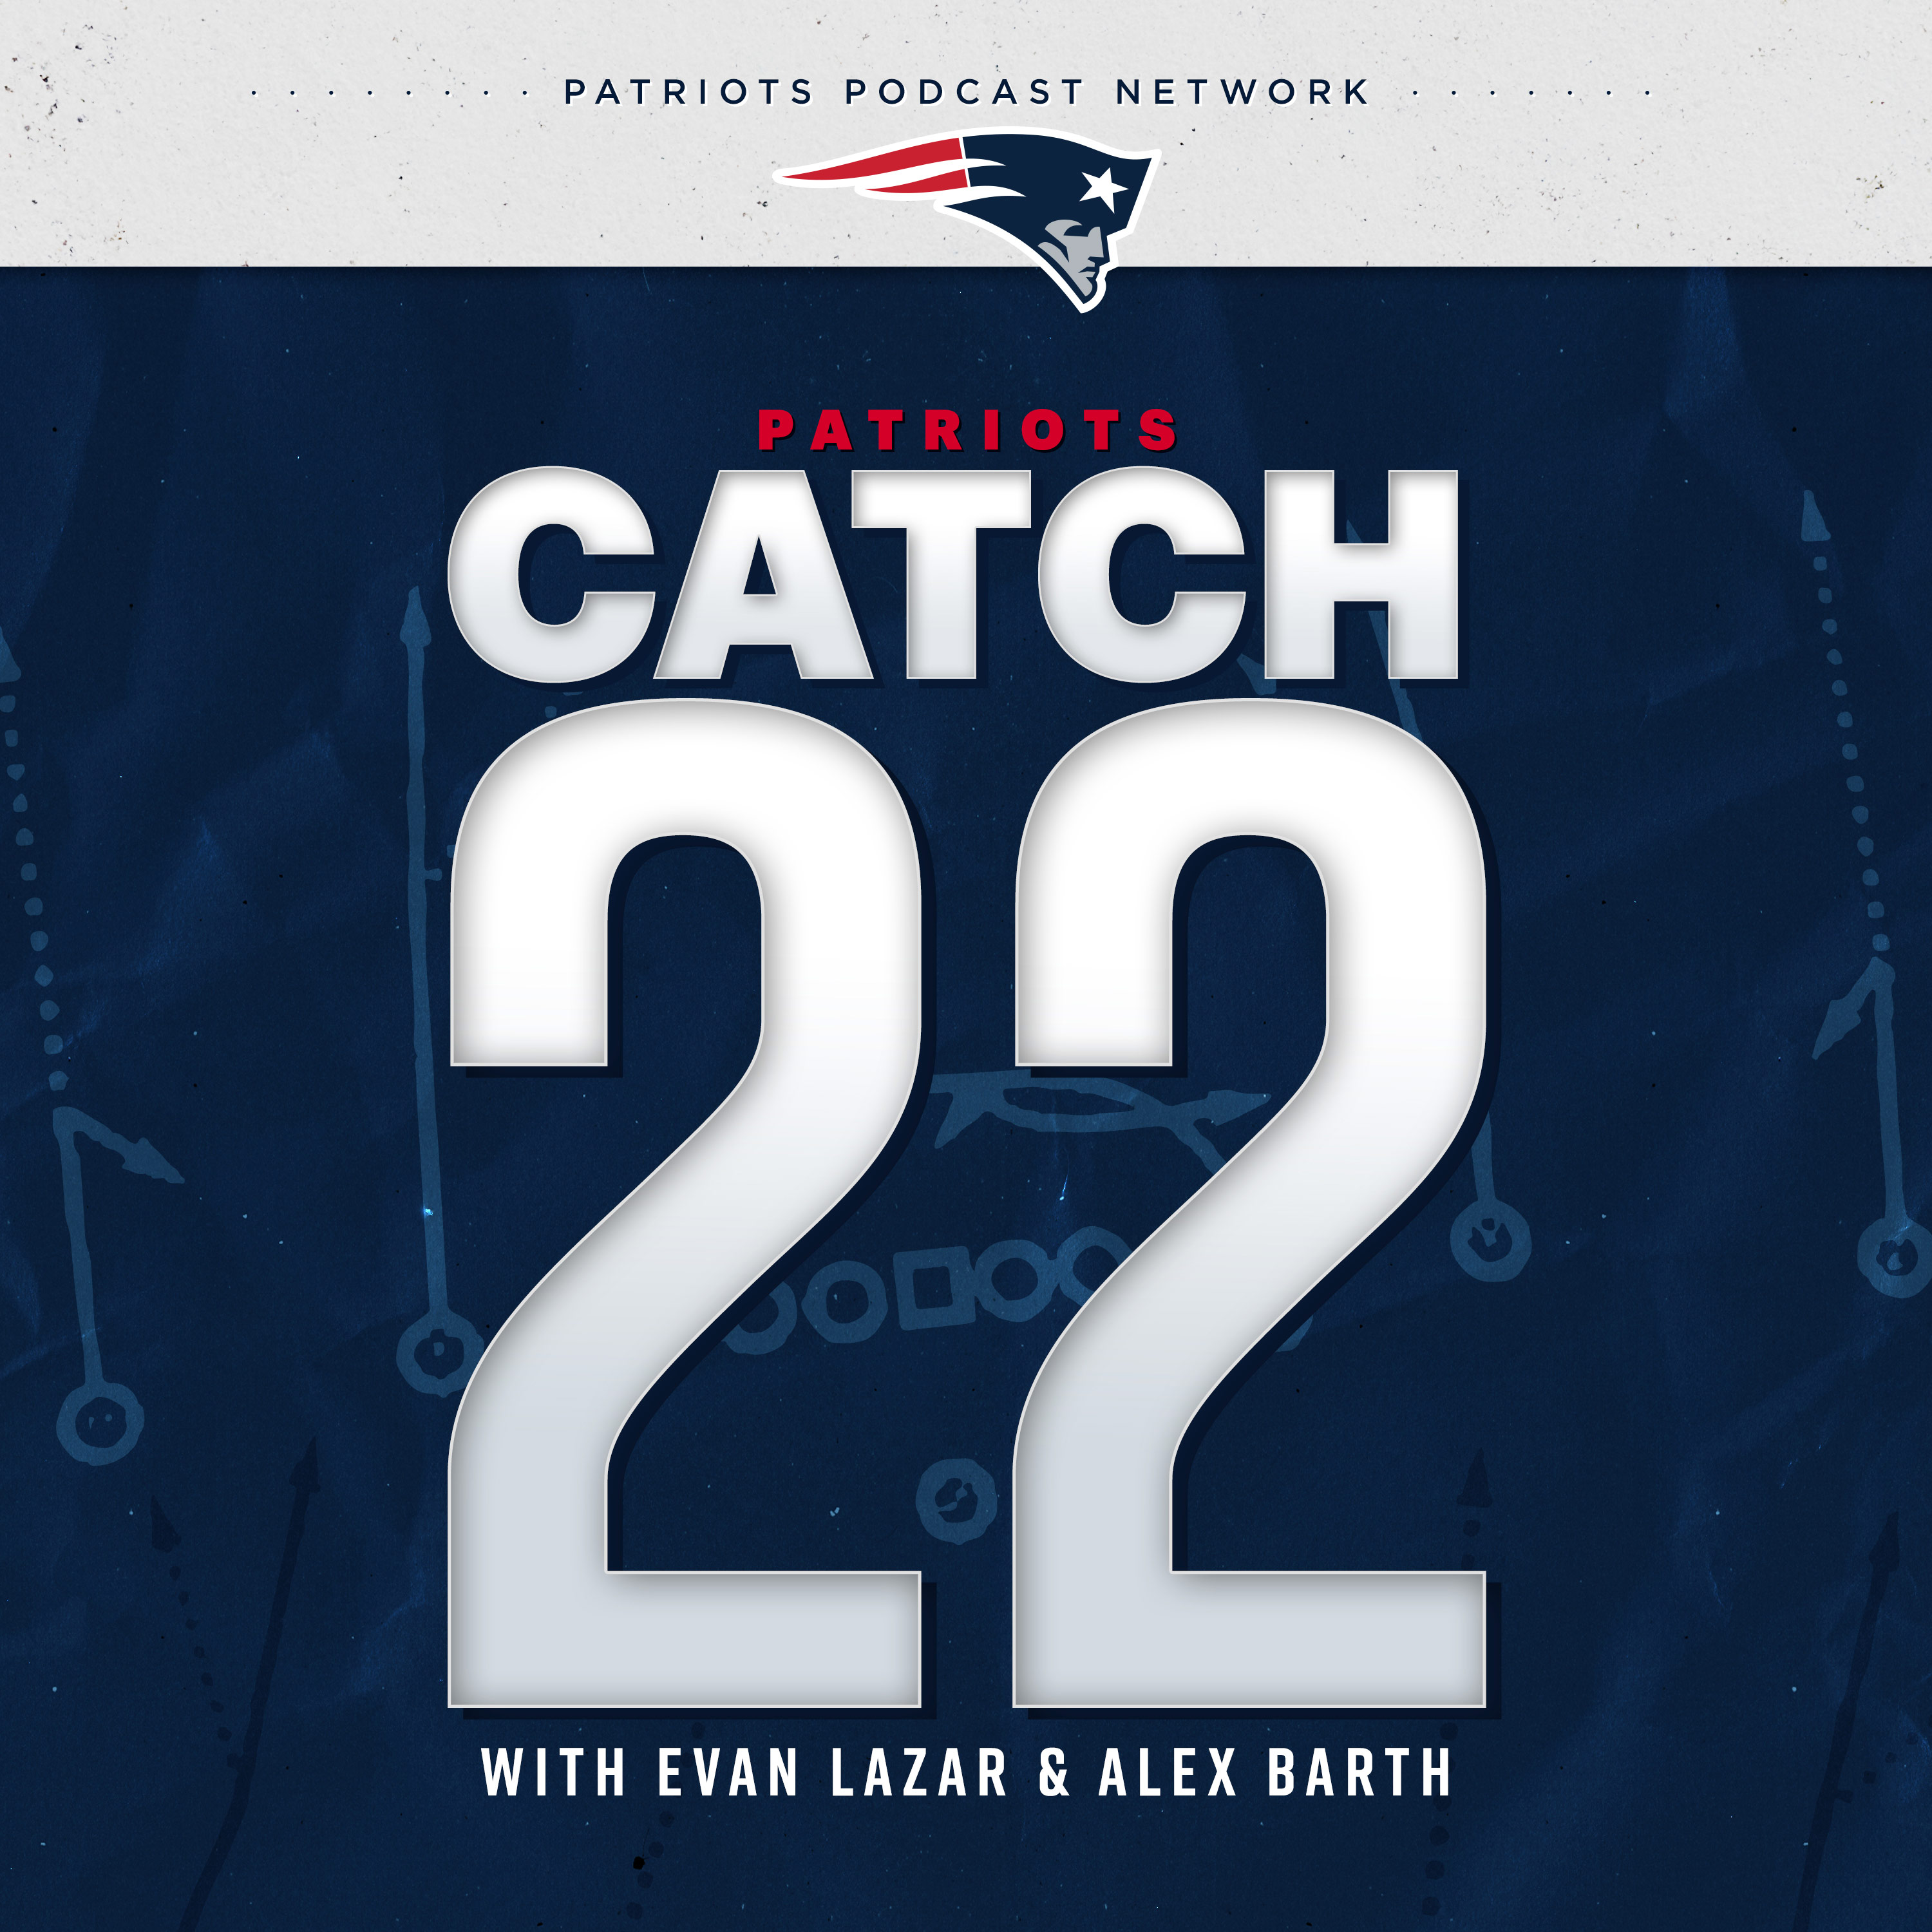 Patriots Catch-22 3/7: Ranking the Draft WRs, Rebuilding the O-Line, Free Agency Preview